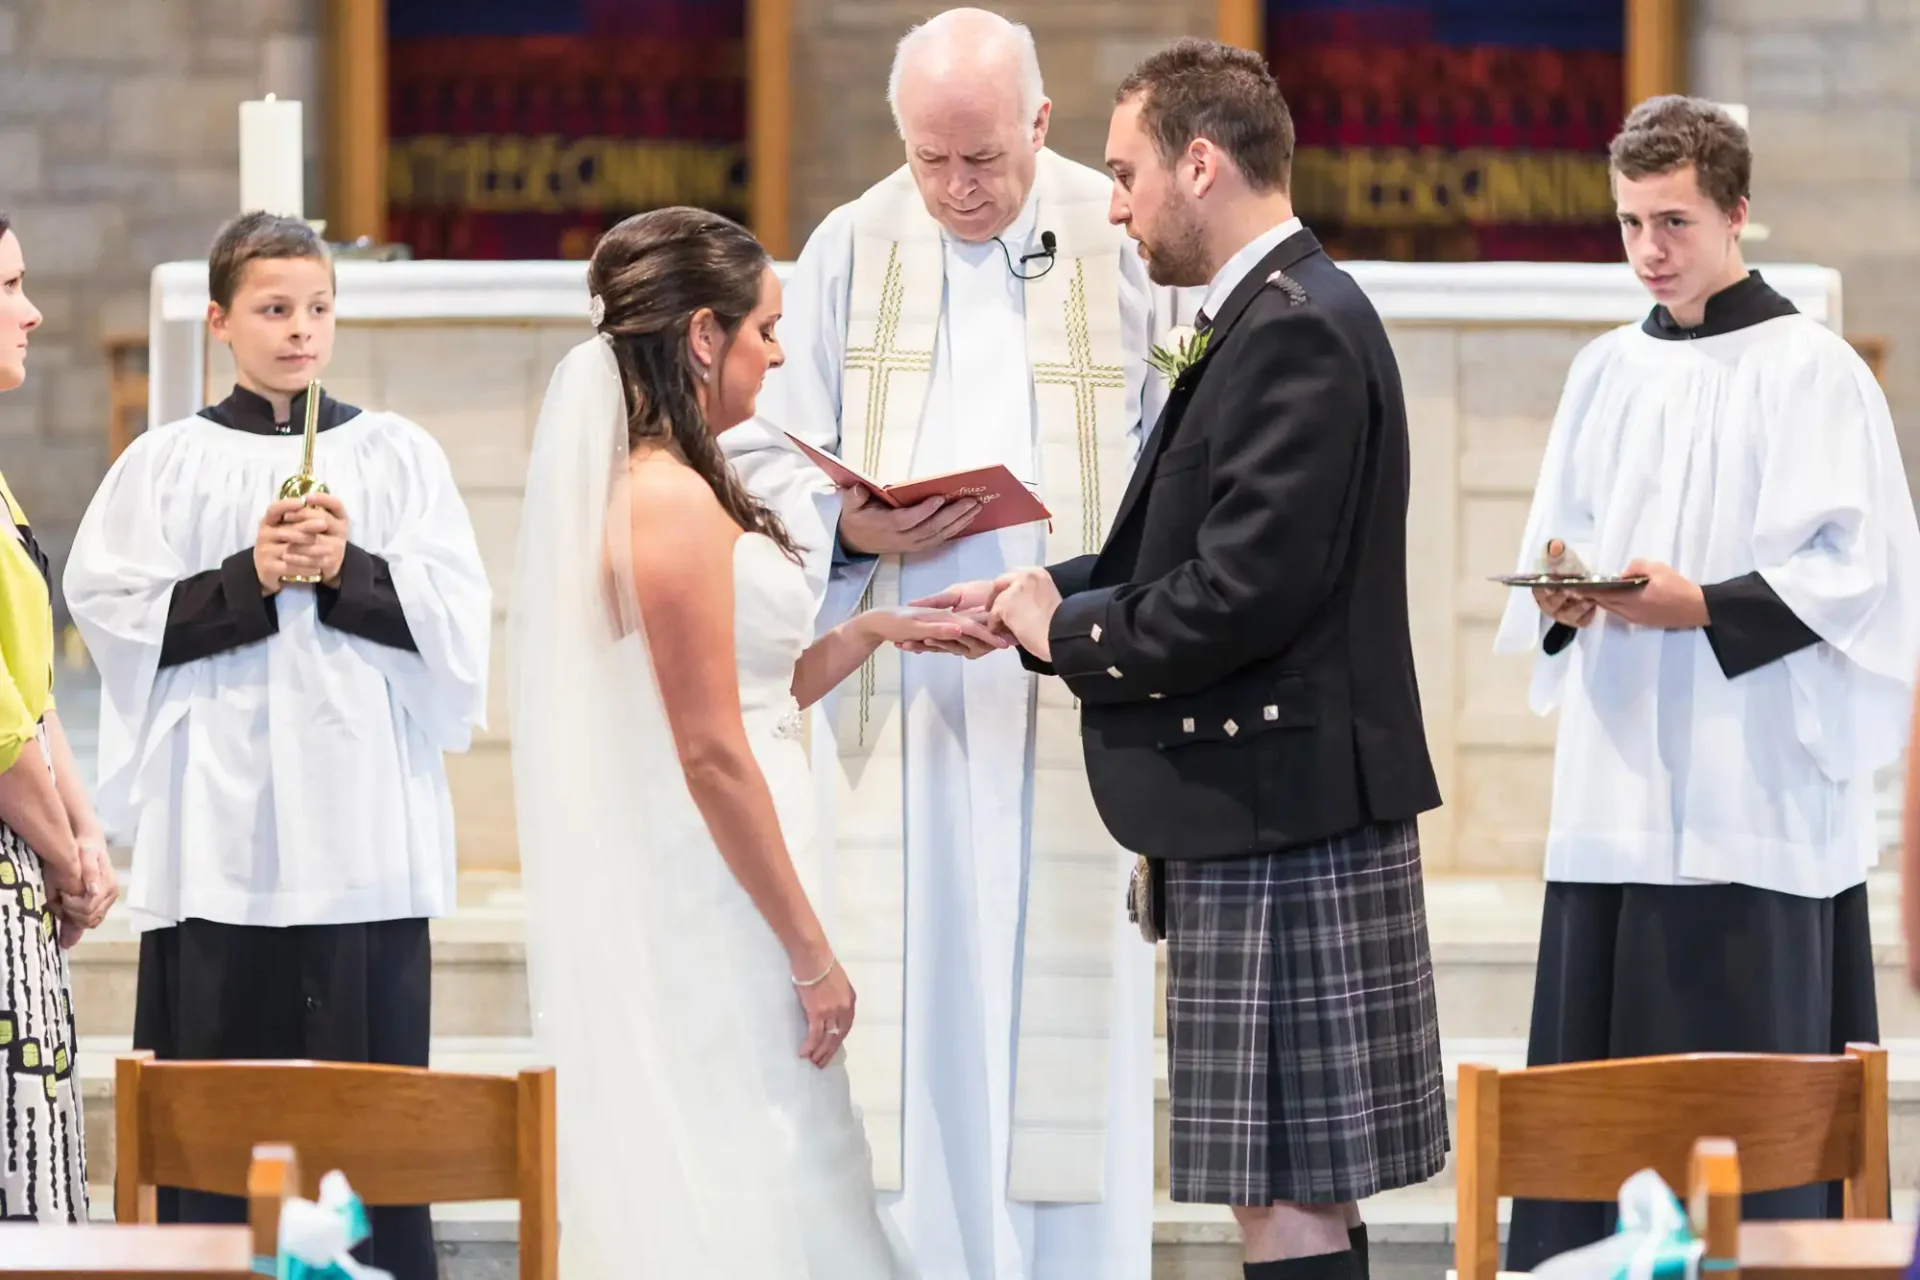 A bride and groom exchange vows in a church ceremony, officiated by a priest, with two altar boys watching.